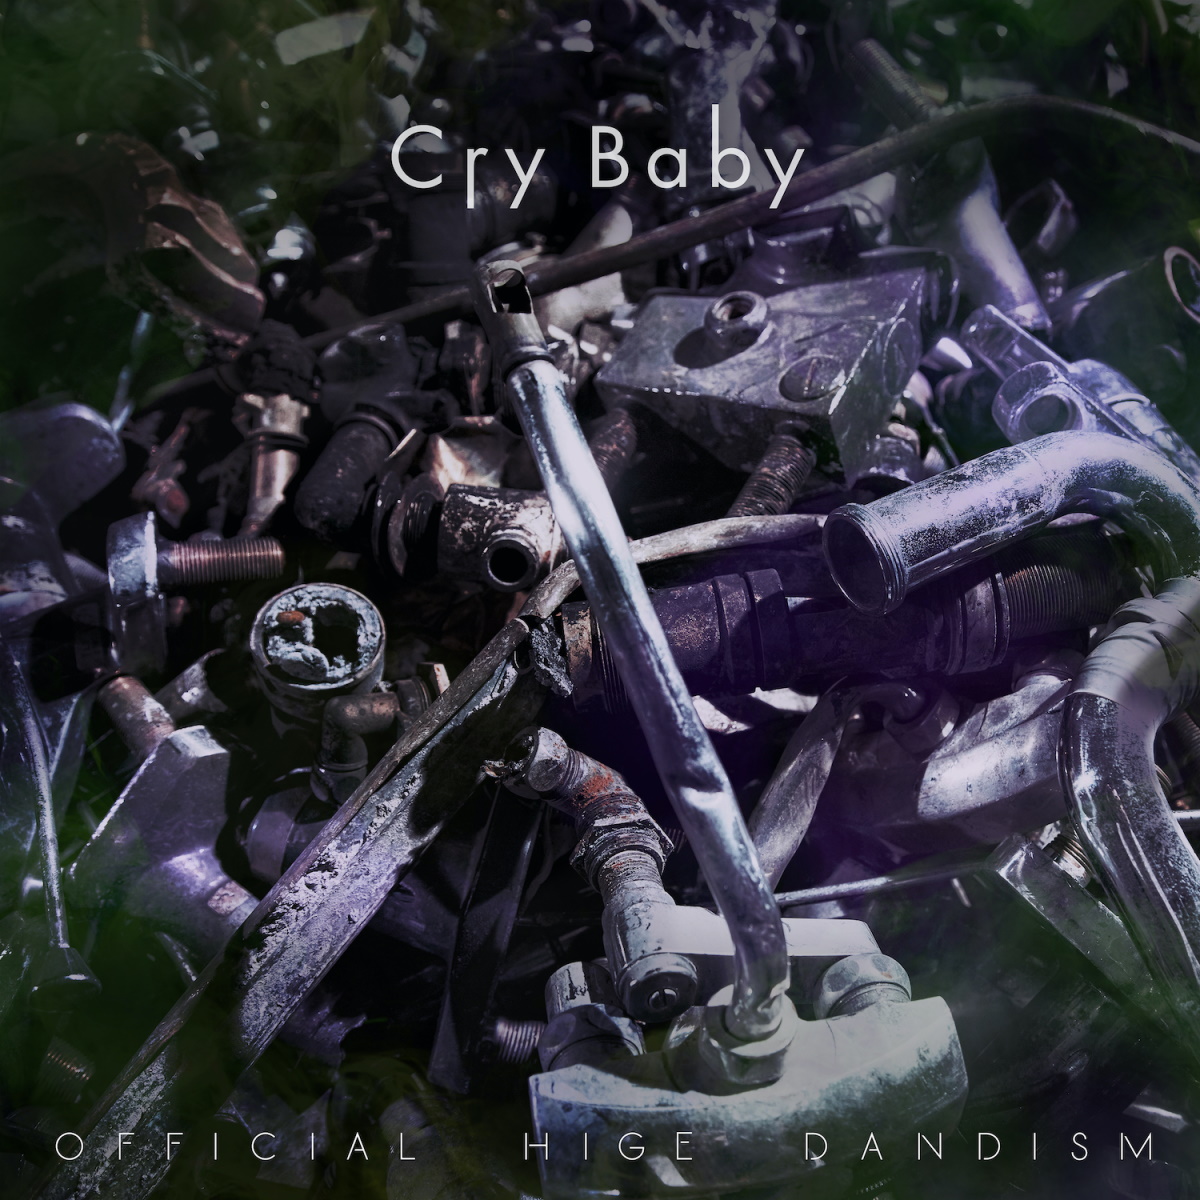 Cover for『Official HIGE DANdism - Cry Baby』from the release『Cry Baby』